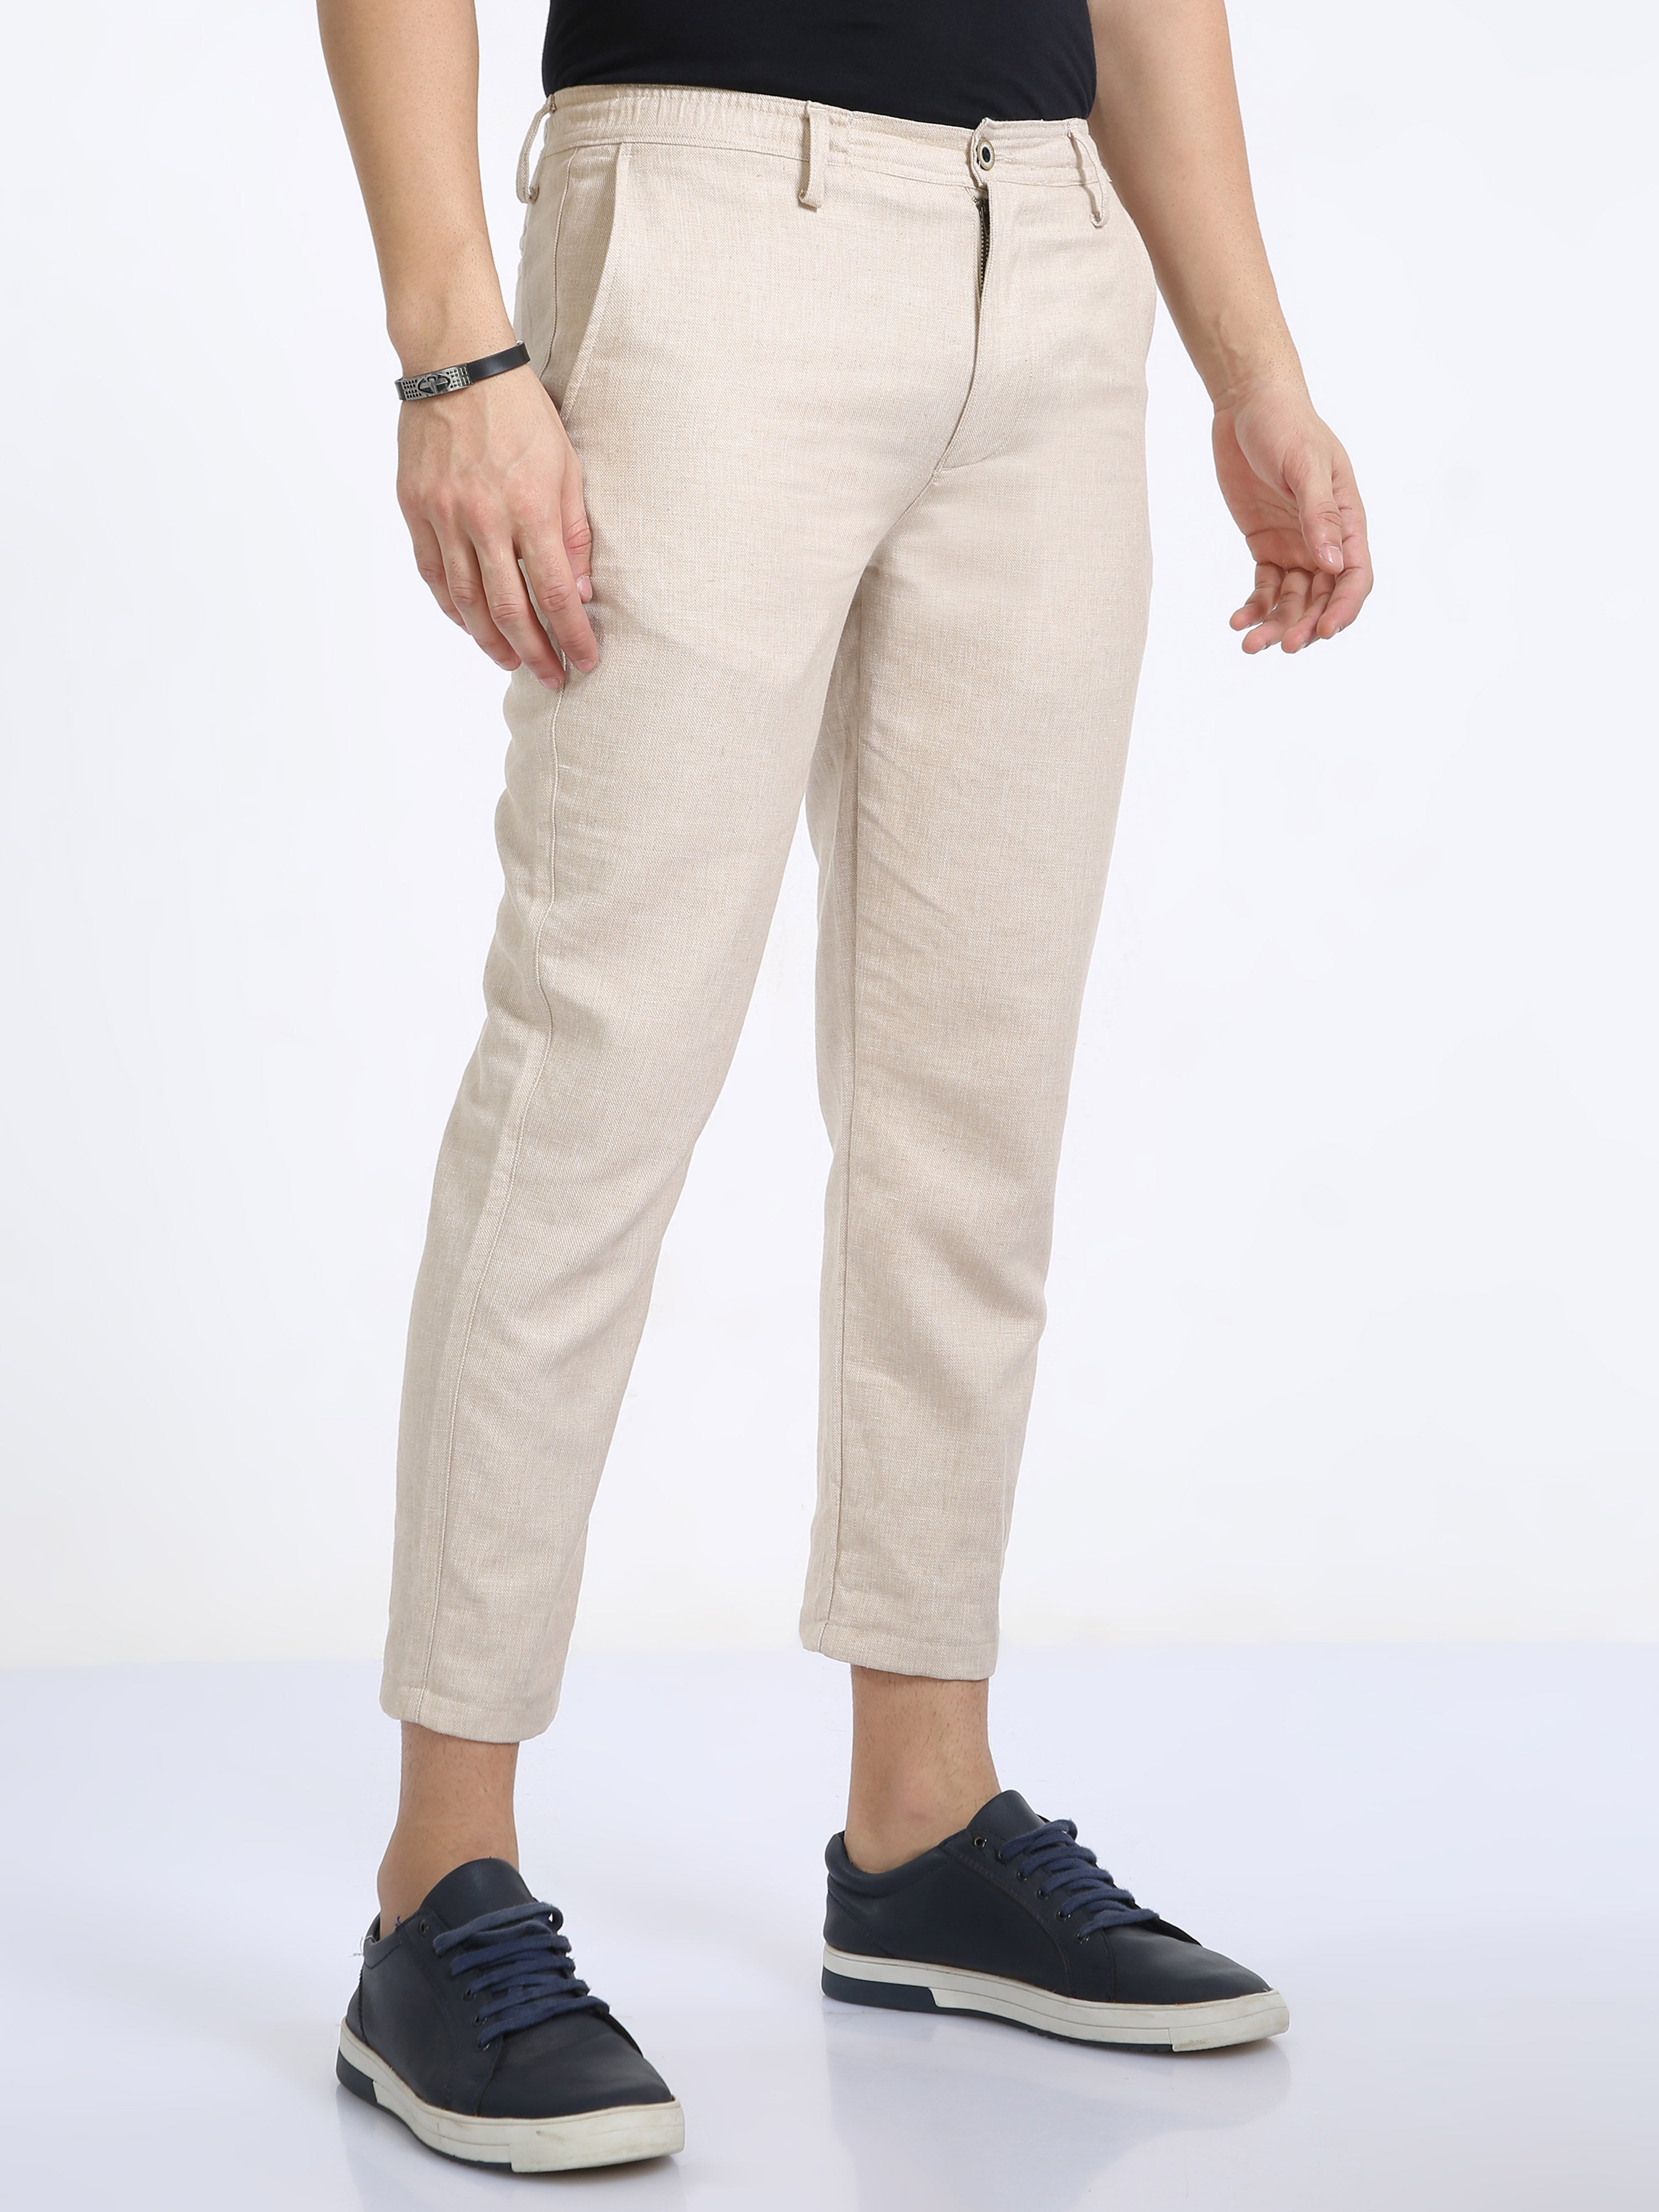 Classic Polo Mens Ankle Fit Solid Cream Melange Color Trousers | To2-28 C-Lgry-Al-Ly